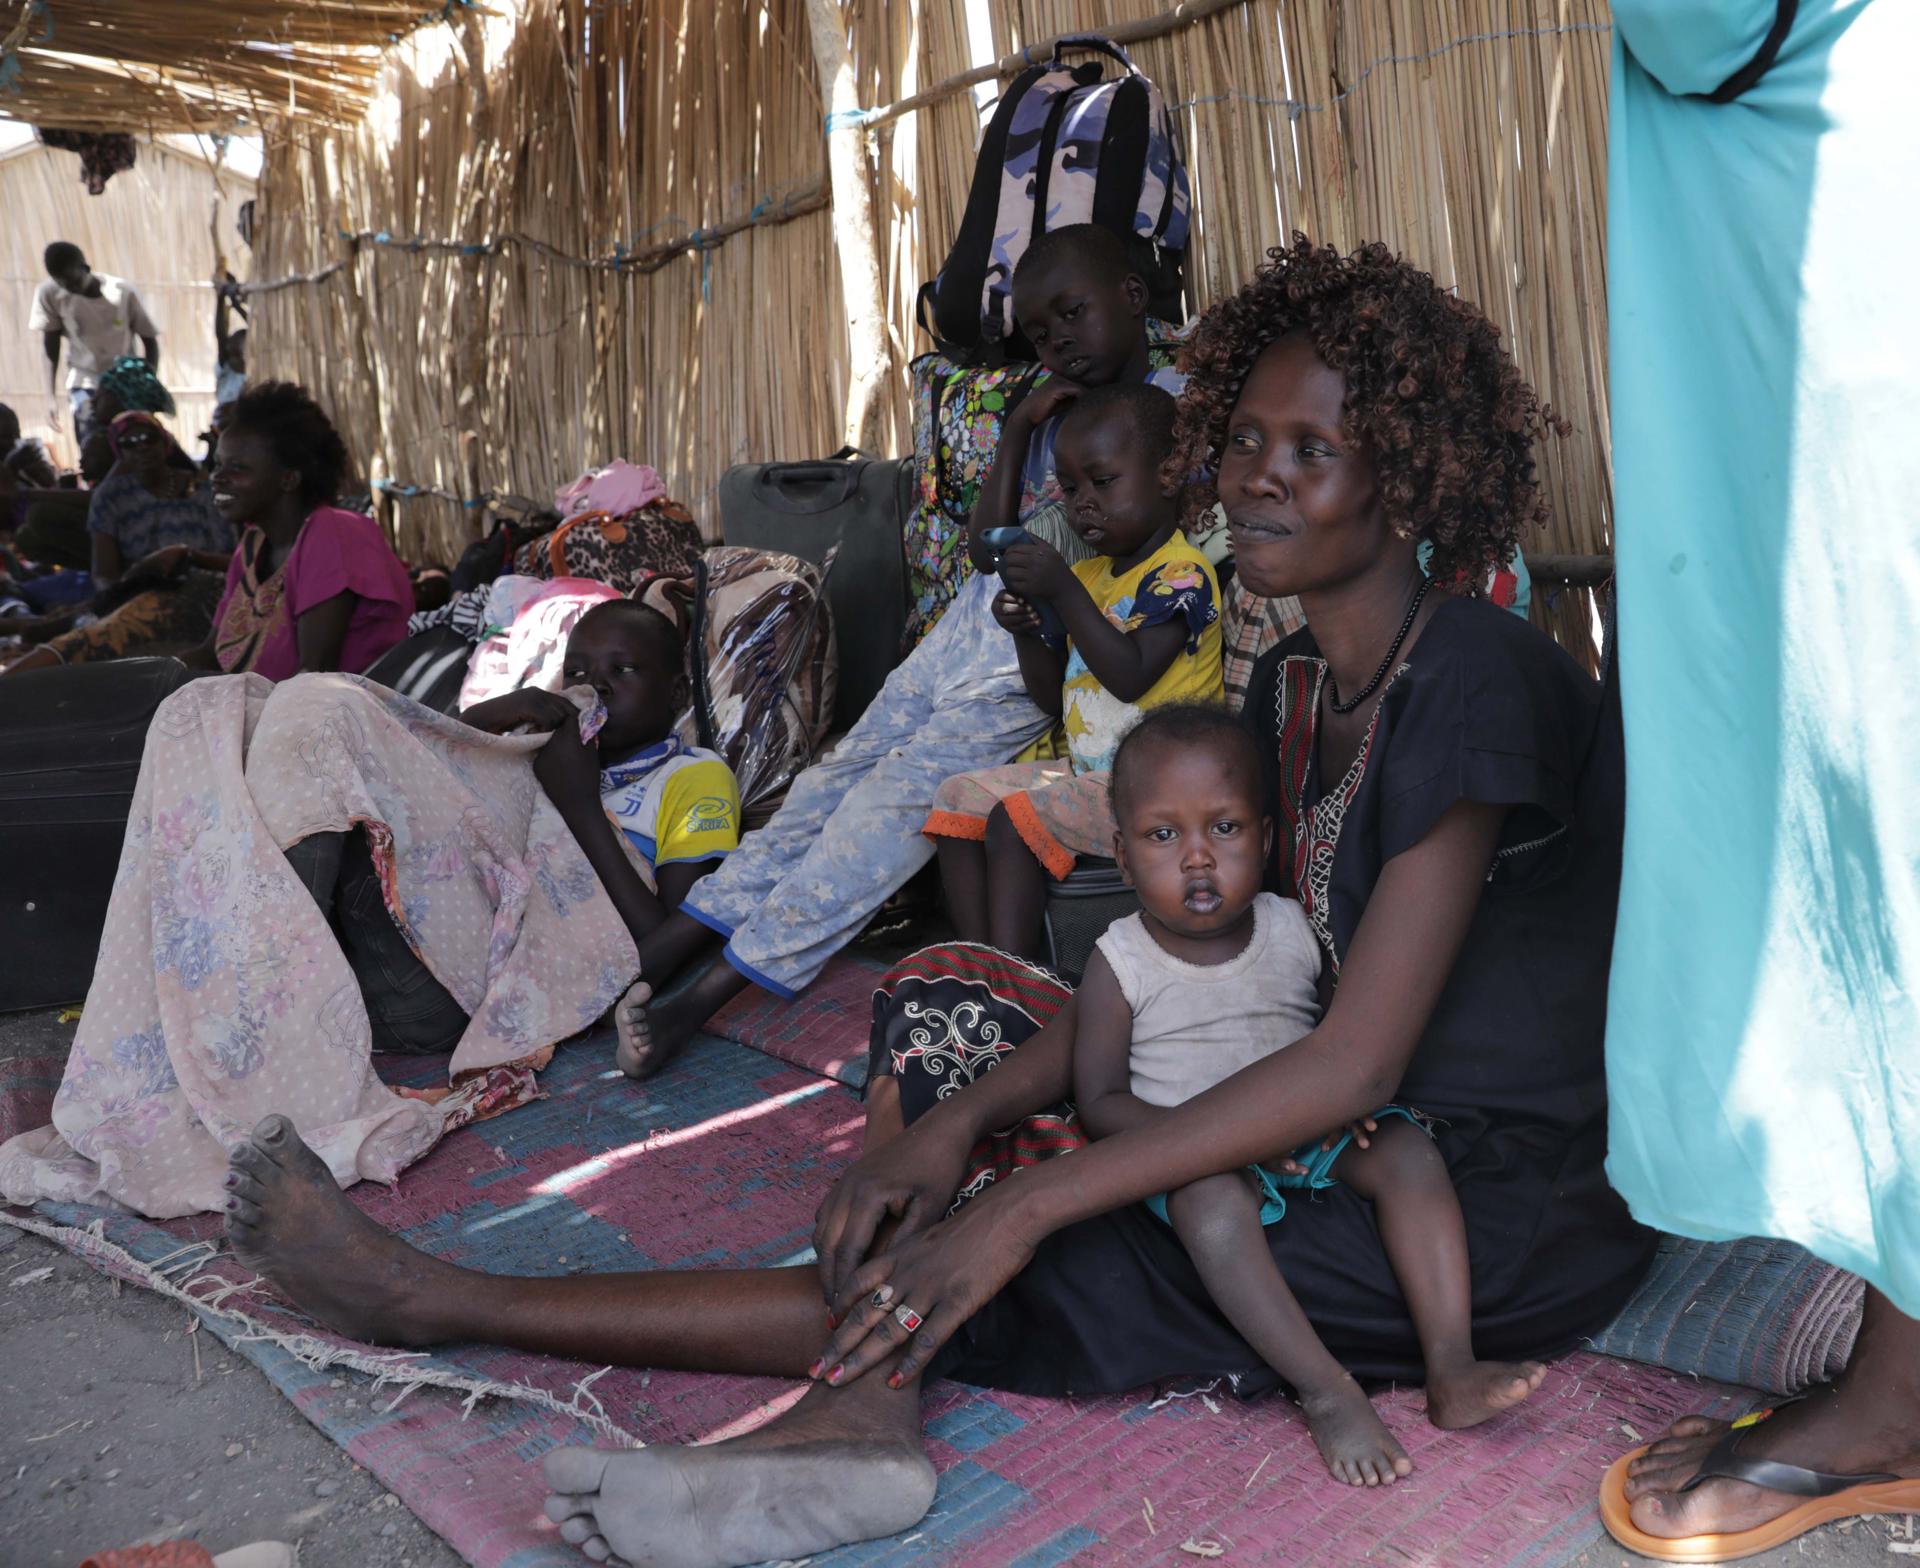 A South Sudanese returnee who fled Sudan with her children takes rest and shelters from the heat while waiting to move toward the town of Renk, at Wunthaou near the border with Sudan, South Sudan, 12 May 2023. EFE-EPA/AMEL PAIN